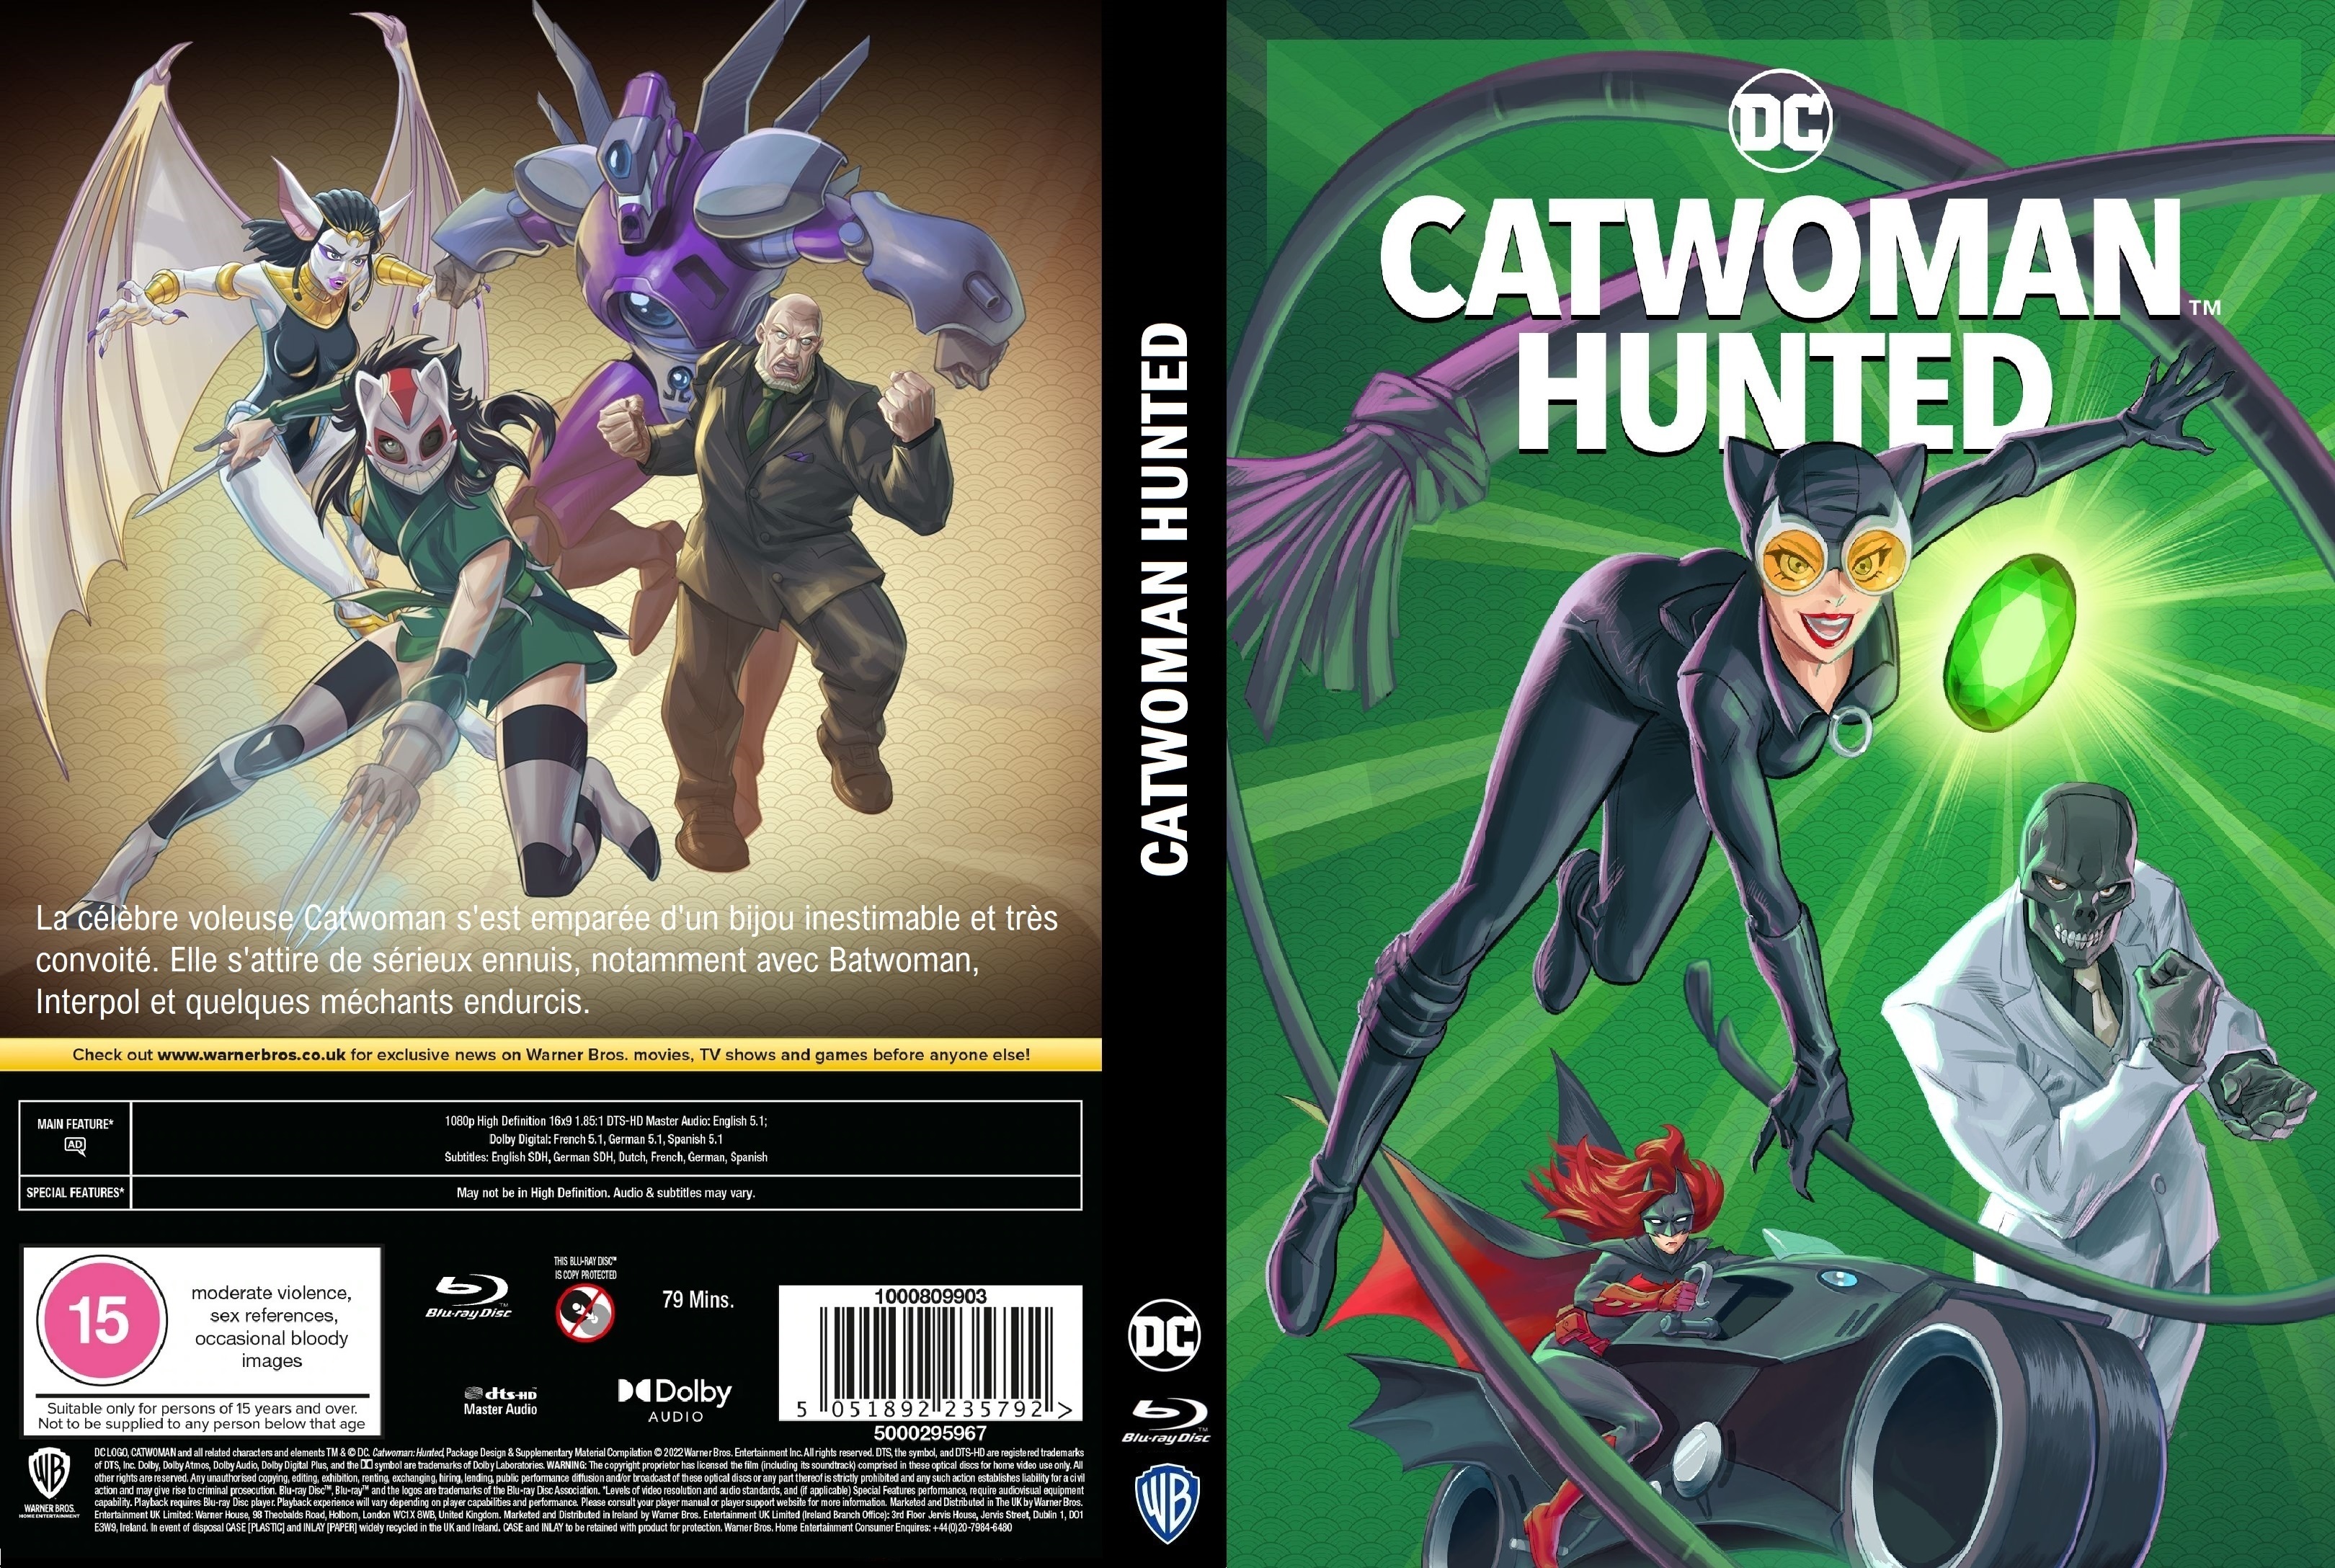 Jaquette DVD Catwoman Hunted custom